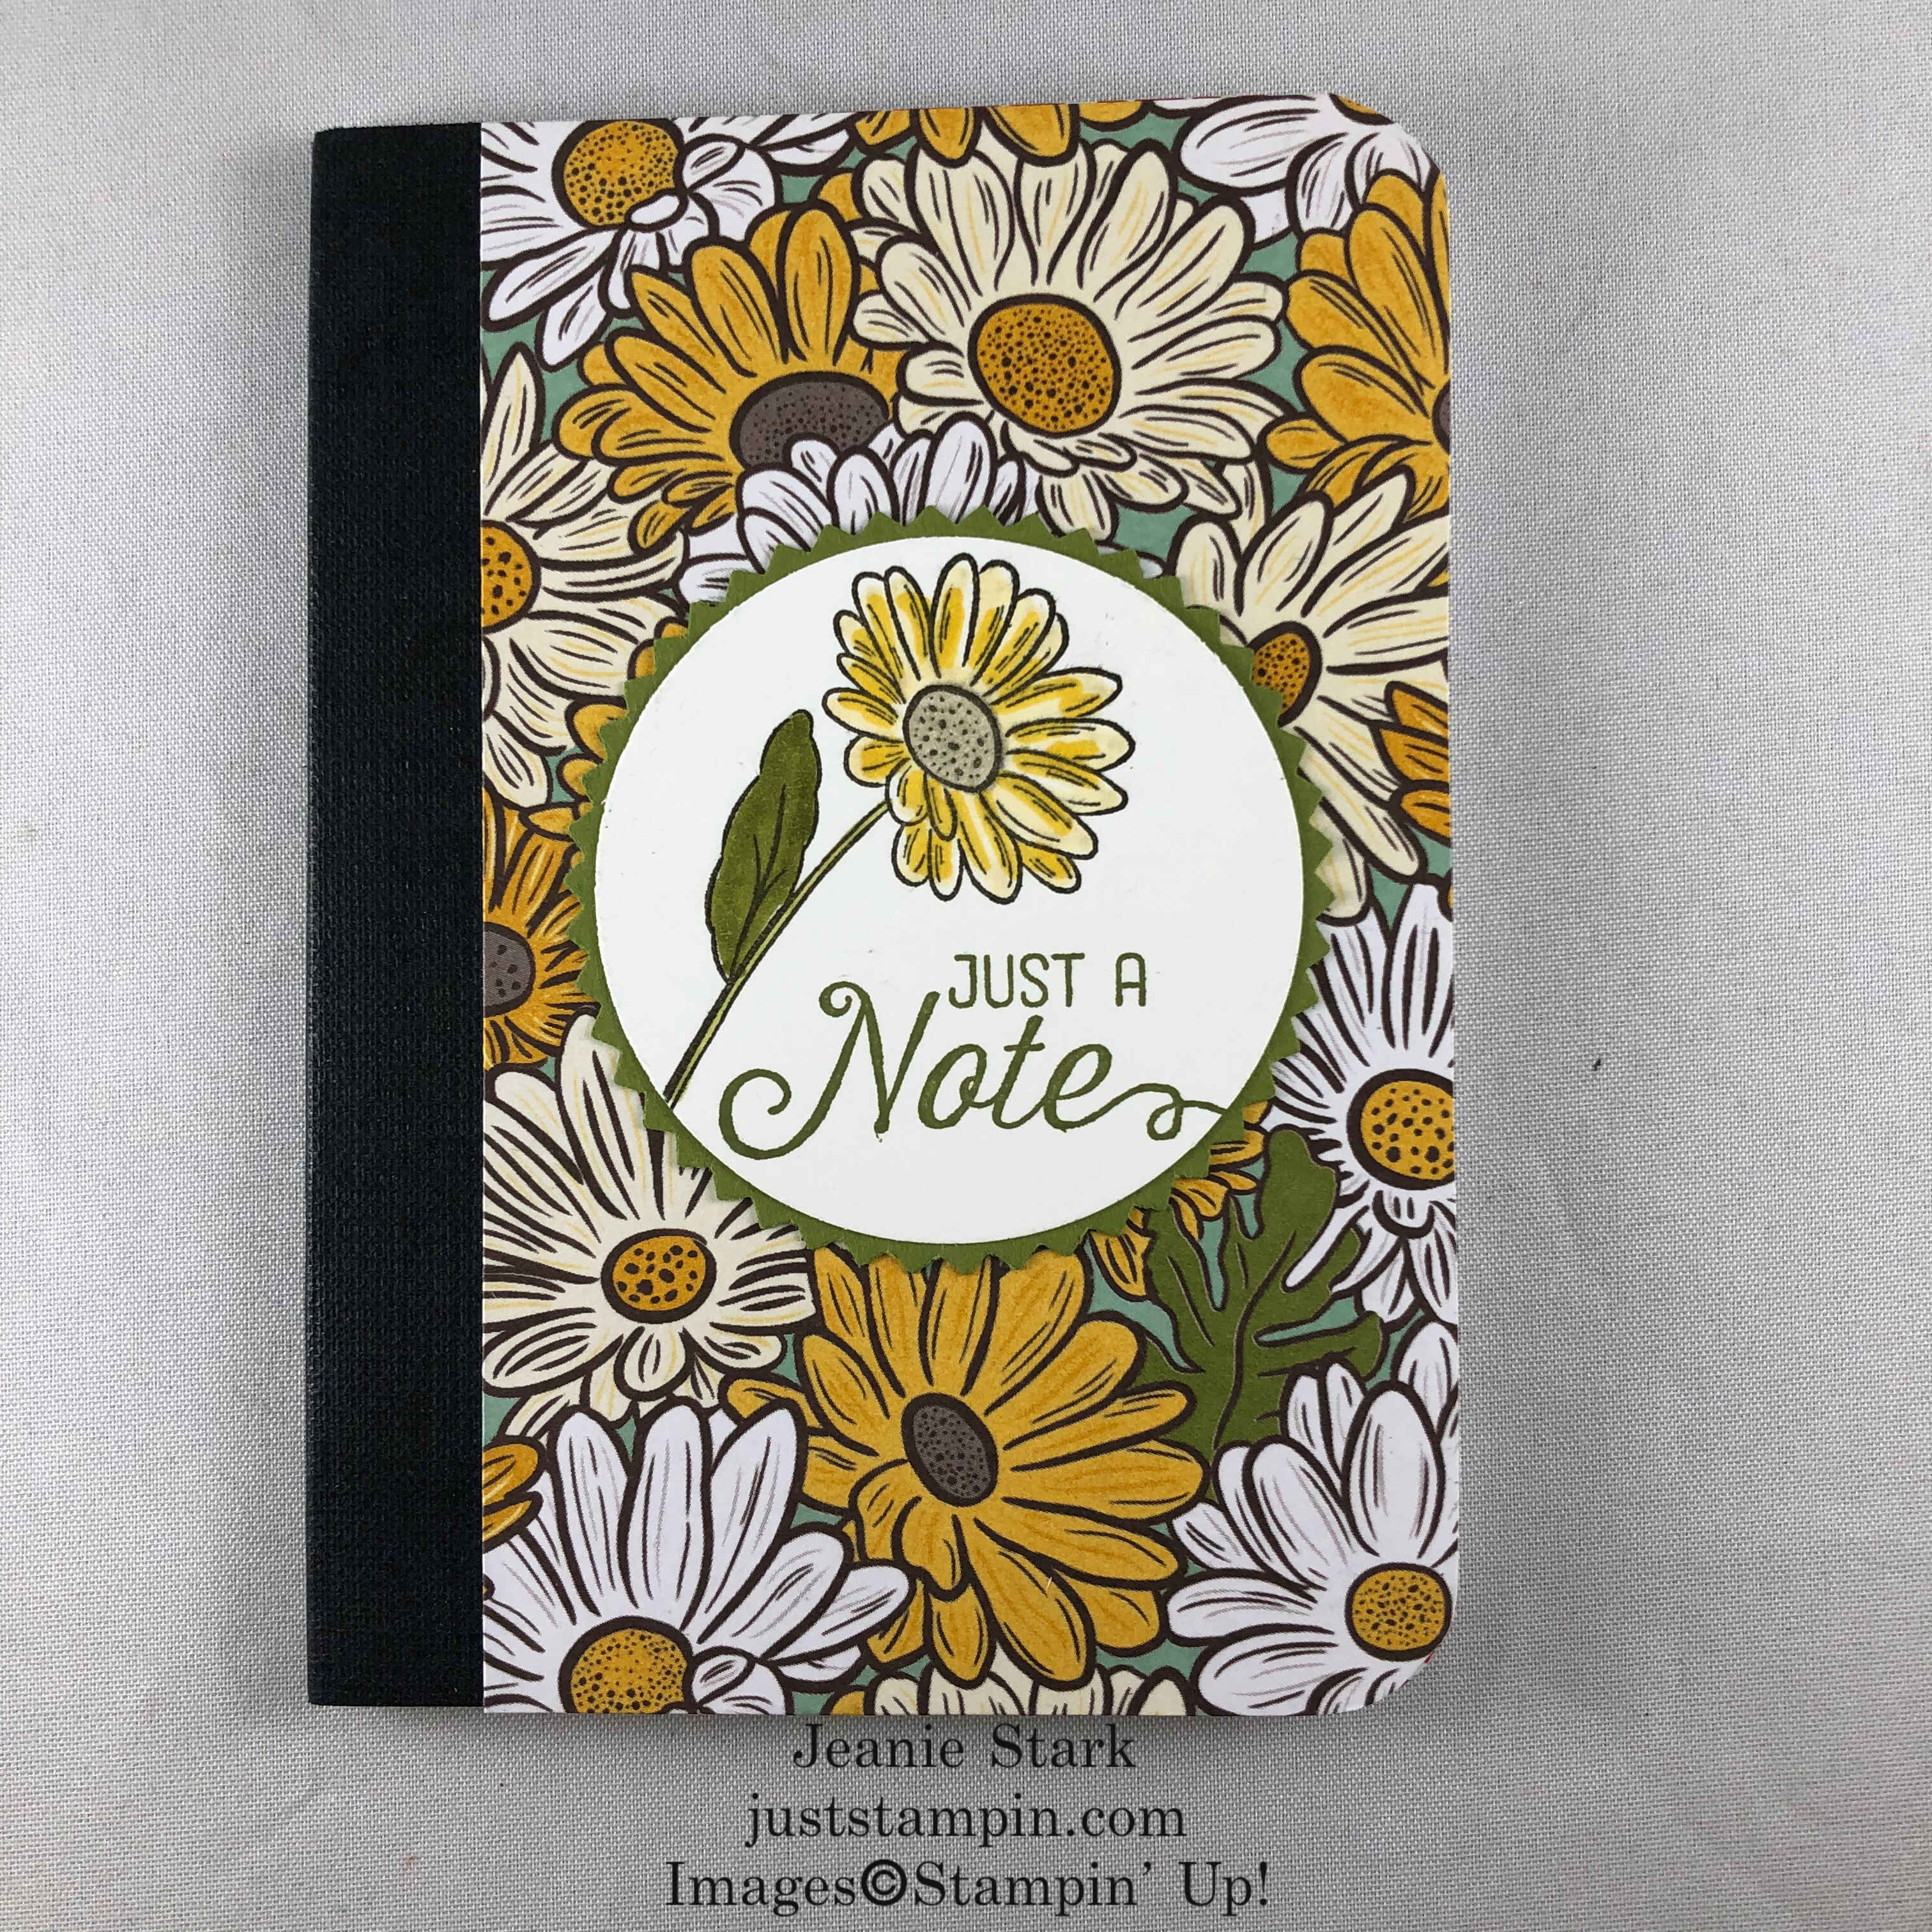 Stampin Up mini notebook featuring the Ornate Style stamp set and Ornate Garden Specialty Designer Series Paper - Jeanie Stark StampinUp